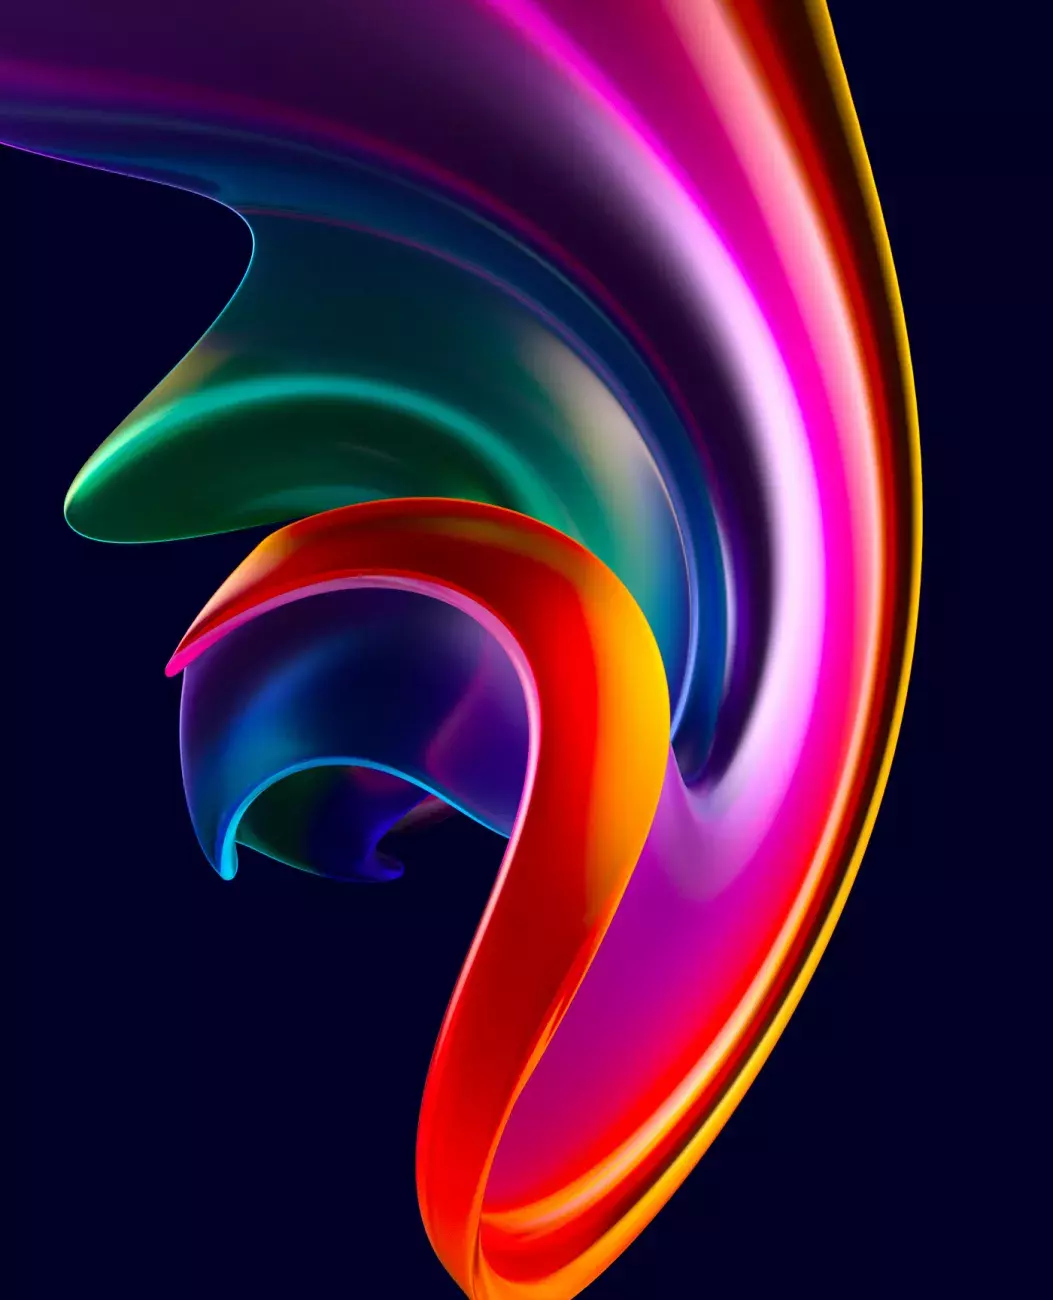 3D Abstract & Colorful Shapes